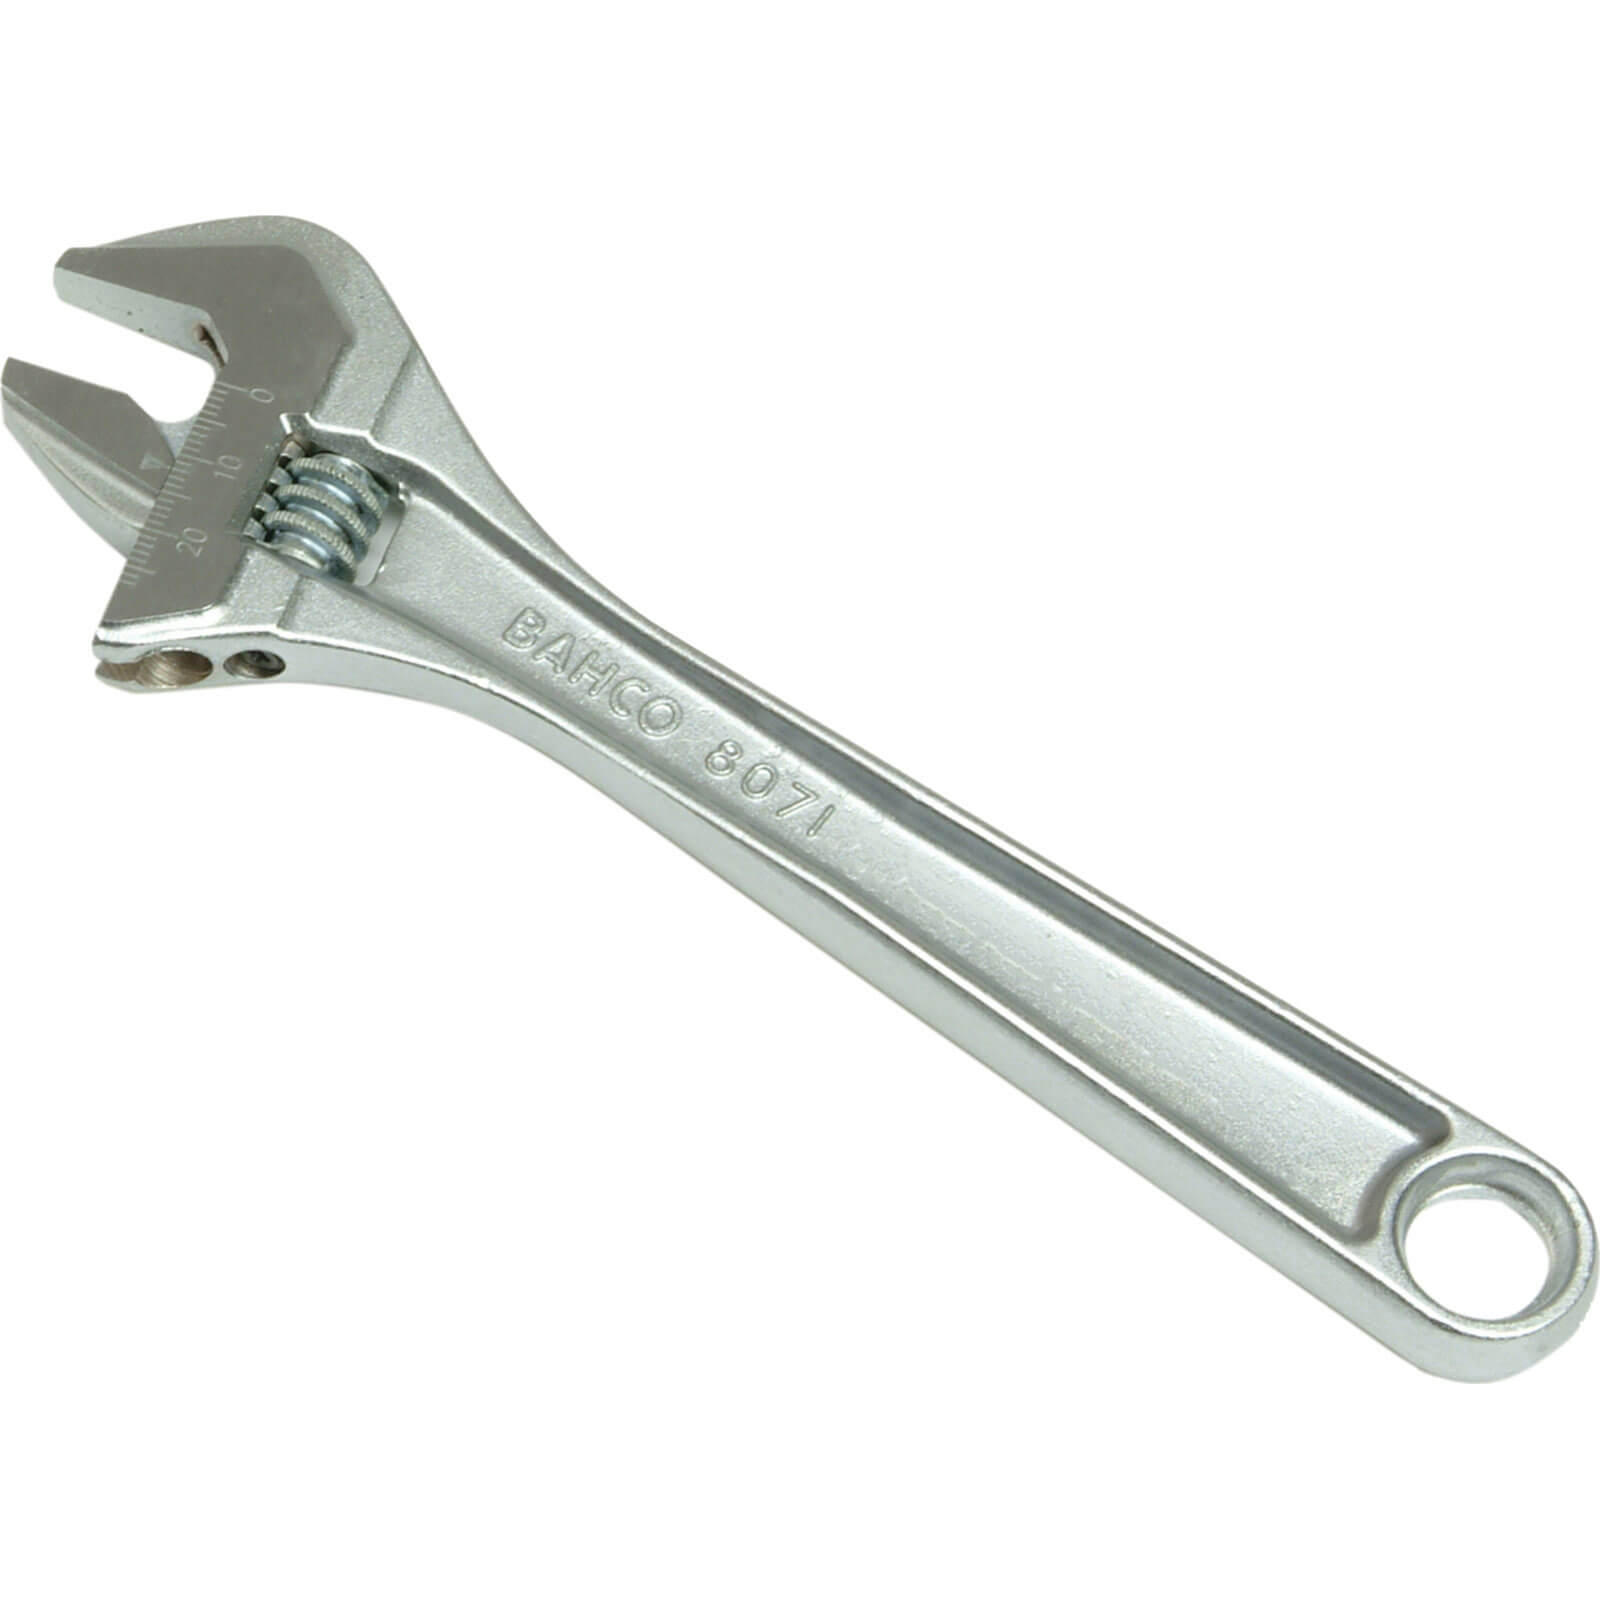 Photo of Bahco 80 Series Adjustable Spanner 100mm